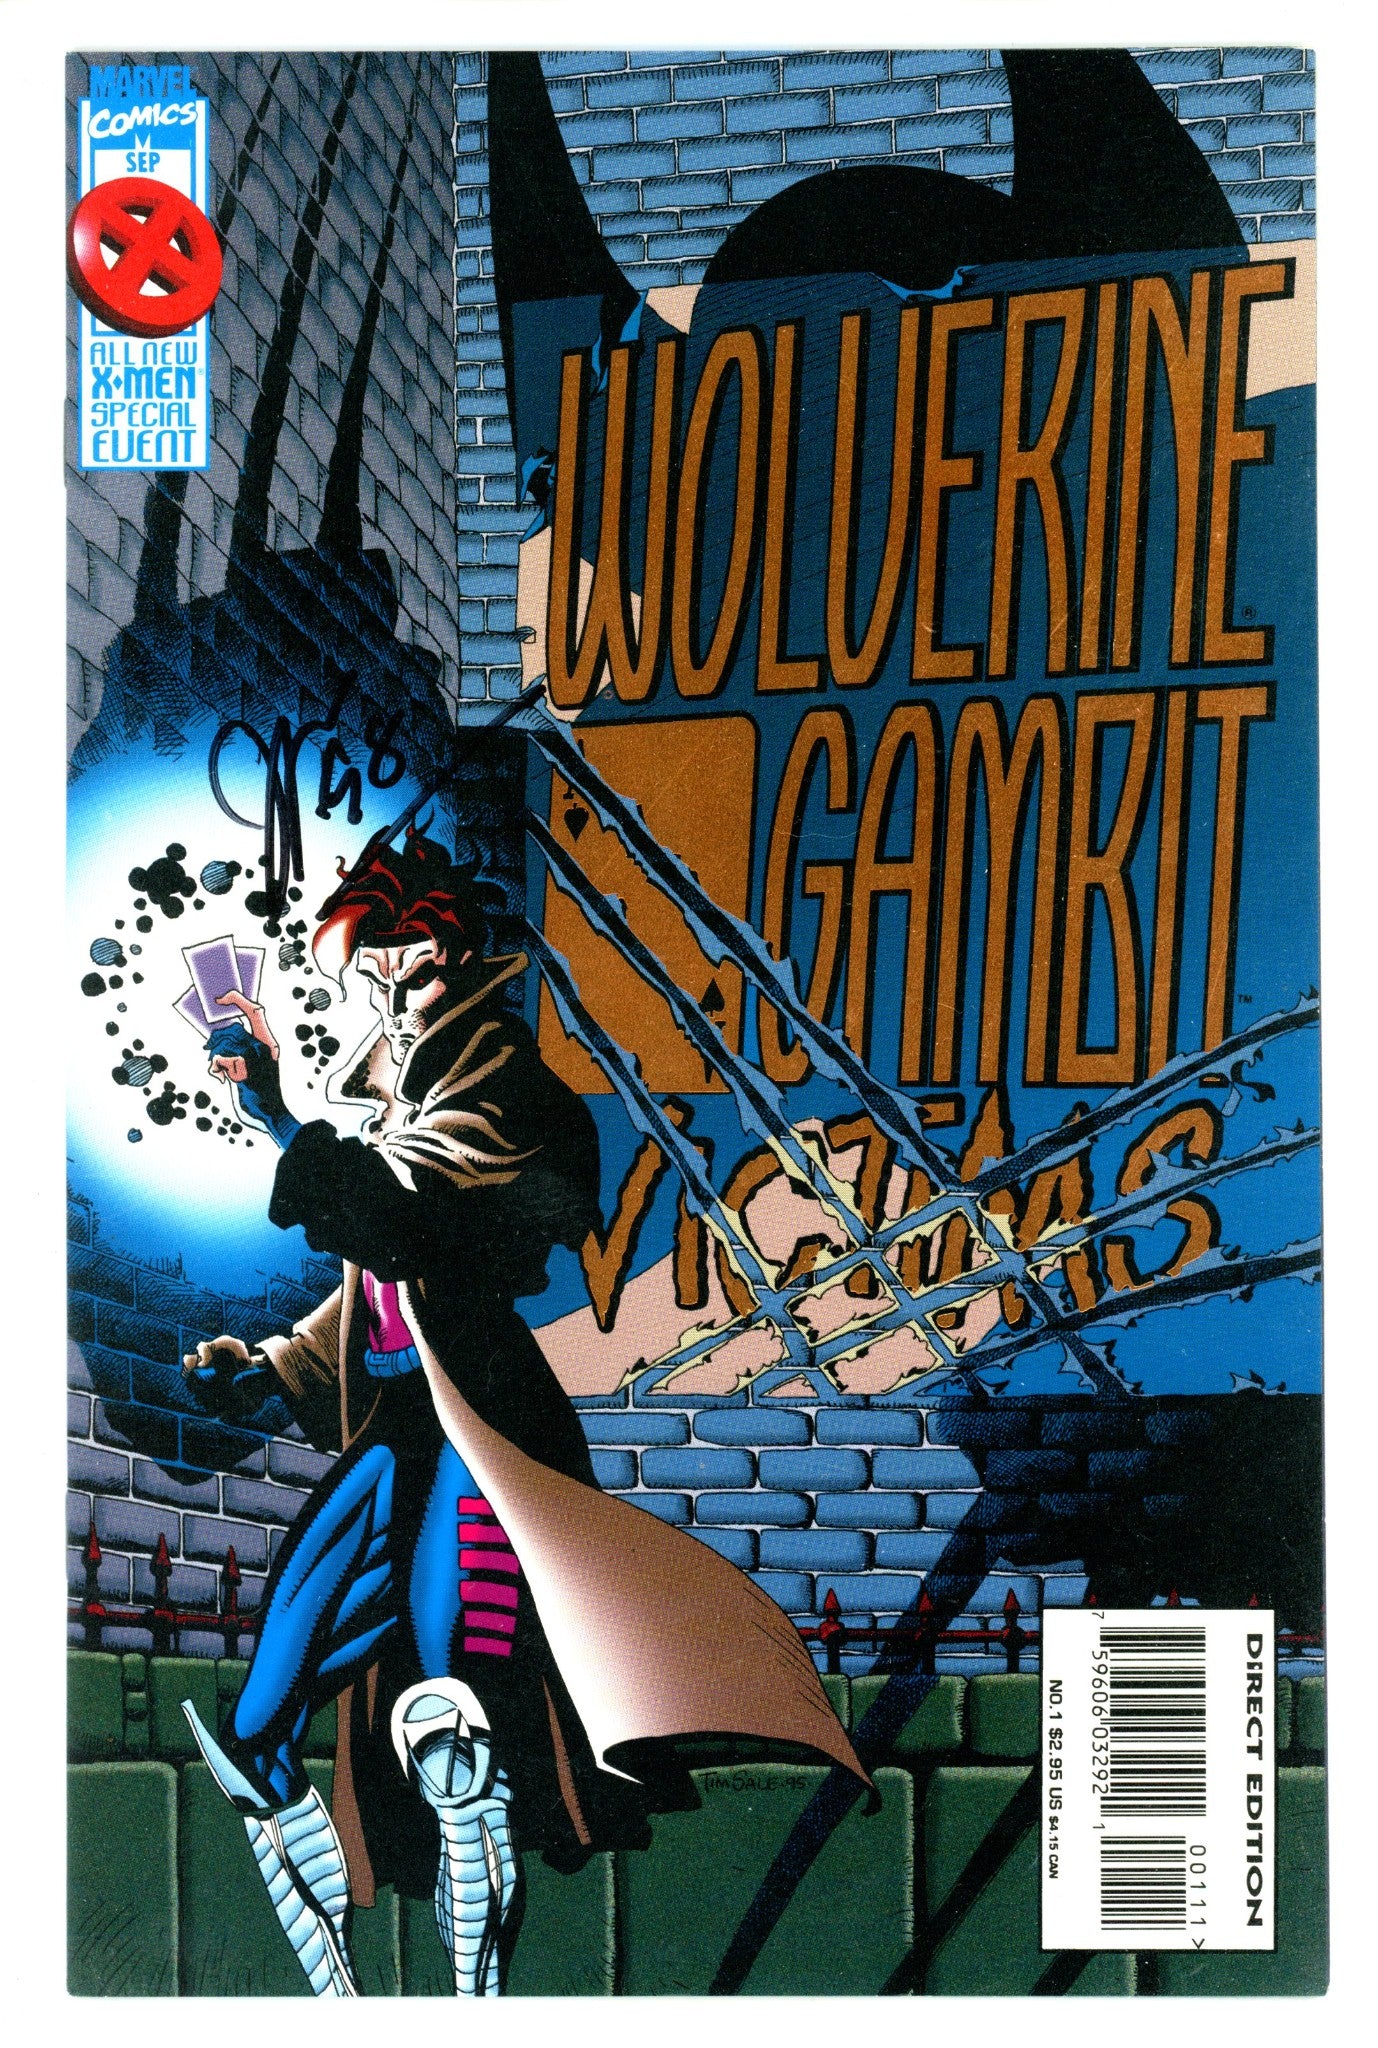 Wolverine / Gambit: Victims 1 Mid Grade (1995) Signed x1 Cover Jeff Loeb 